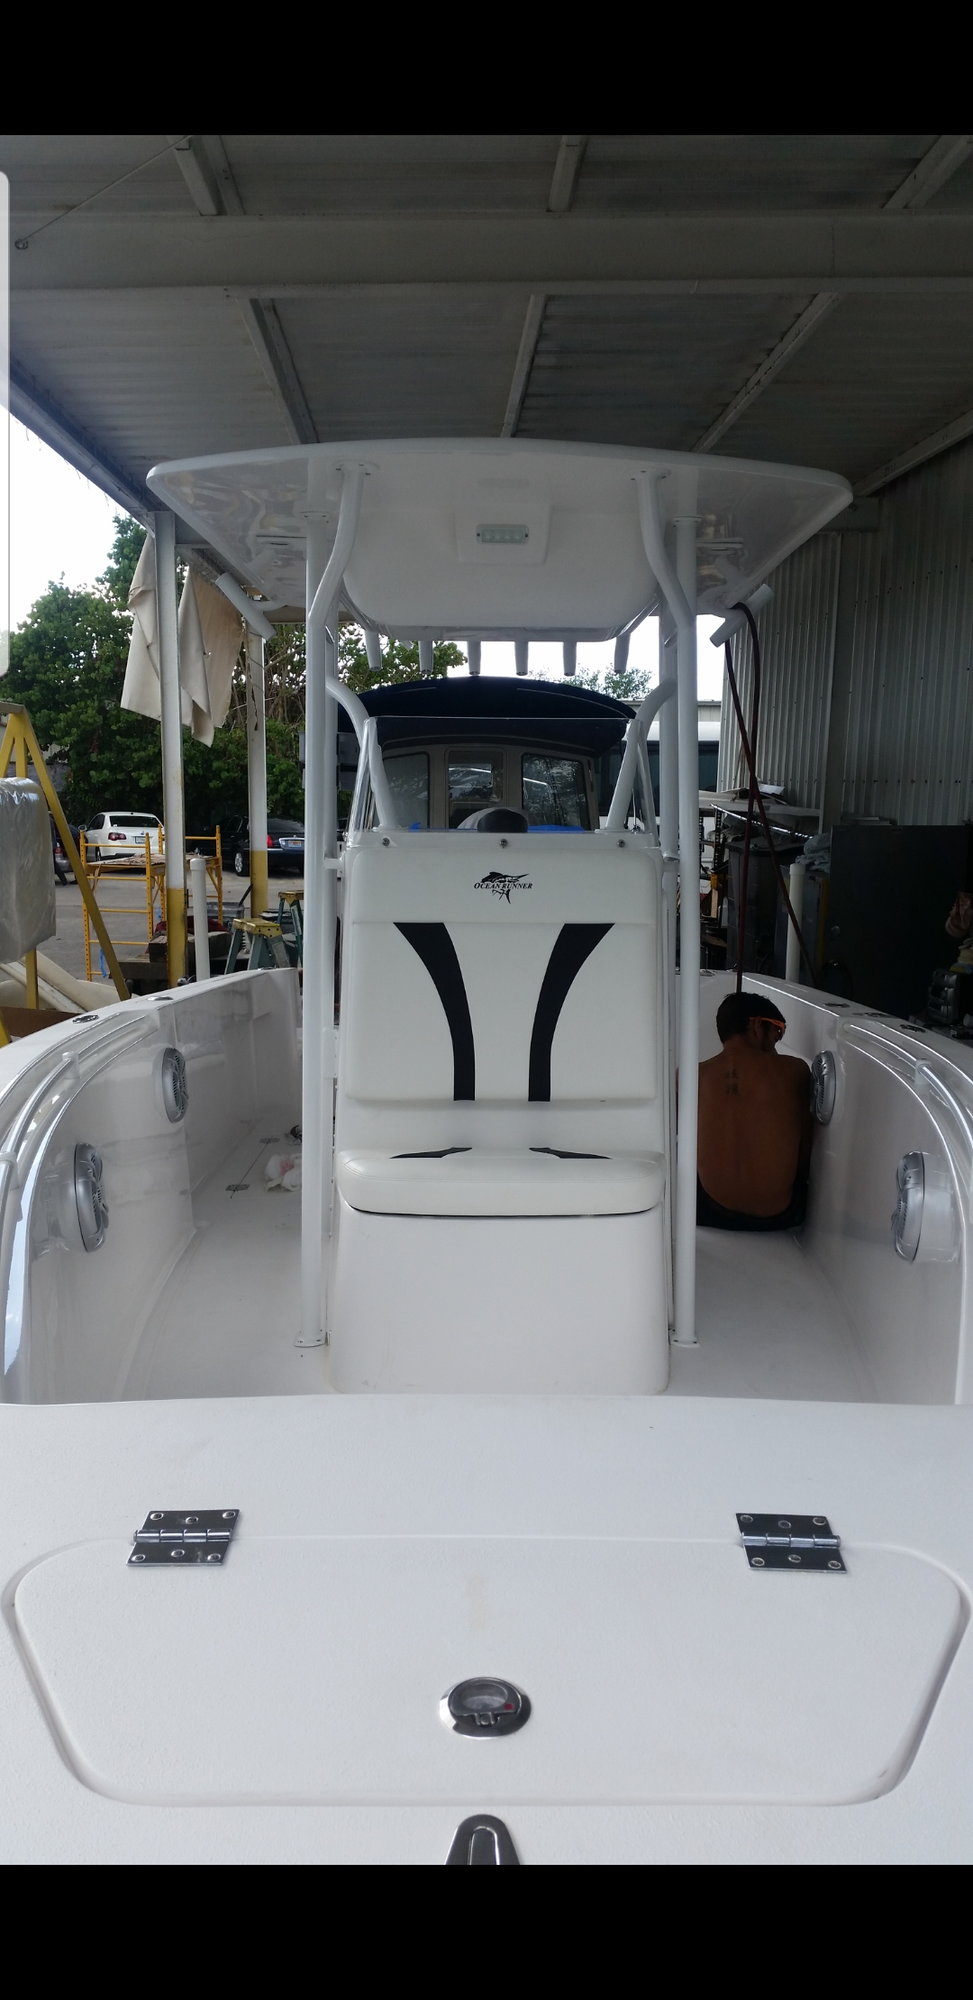 Bucket seats on center console - The Hull Truth - Boating and Fishing Forum